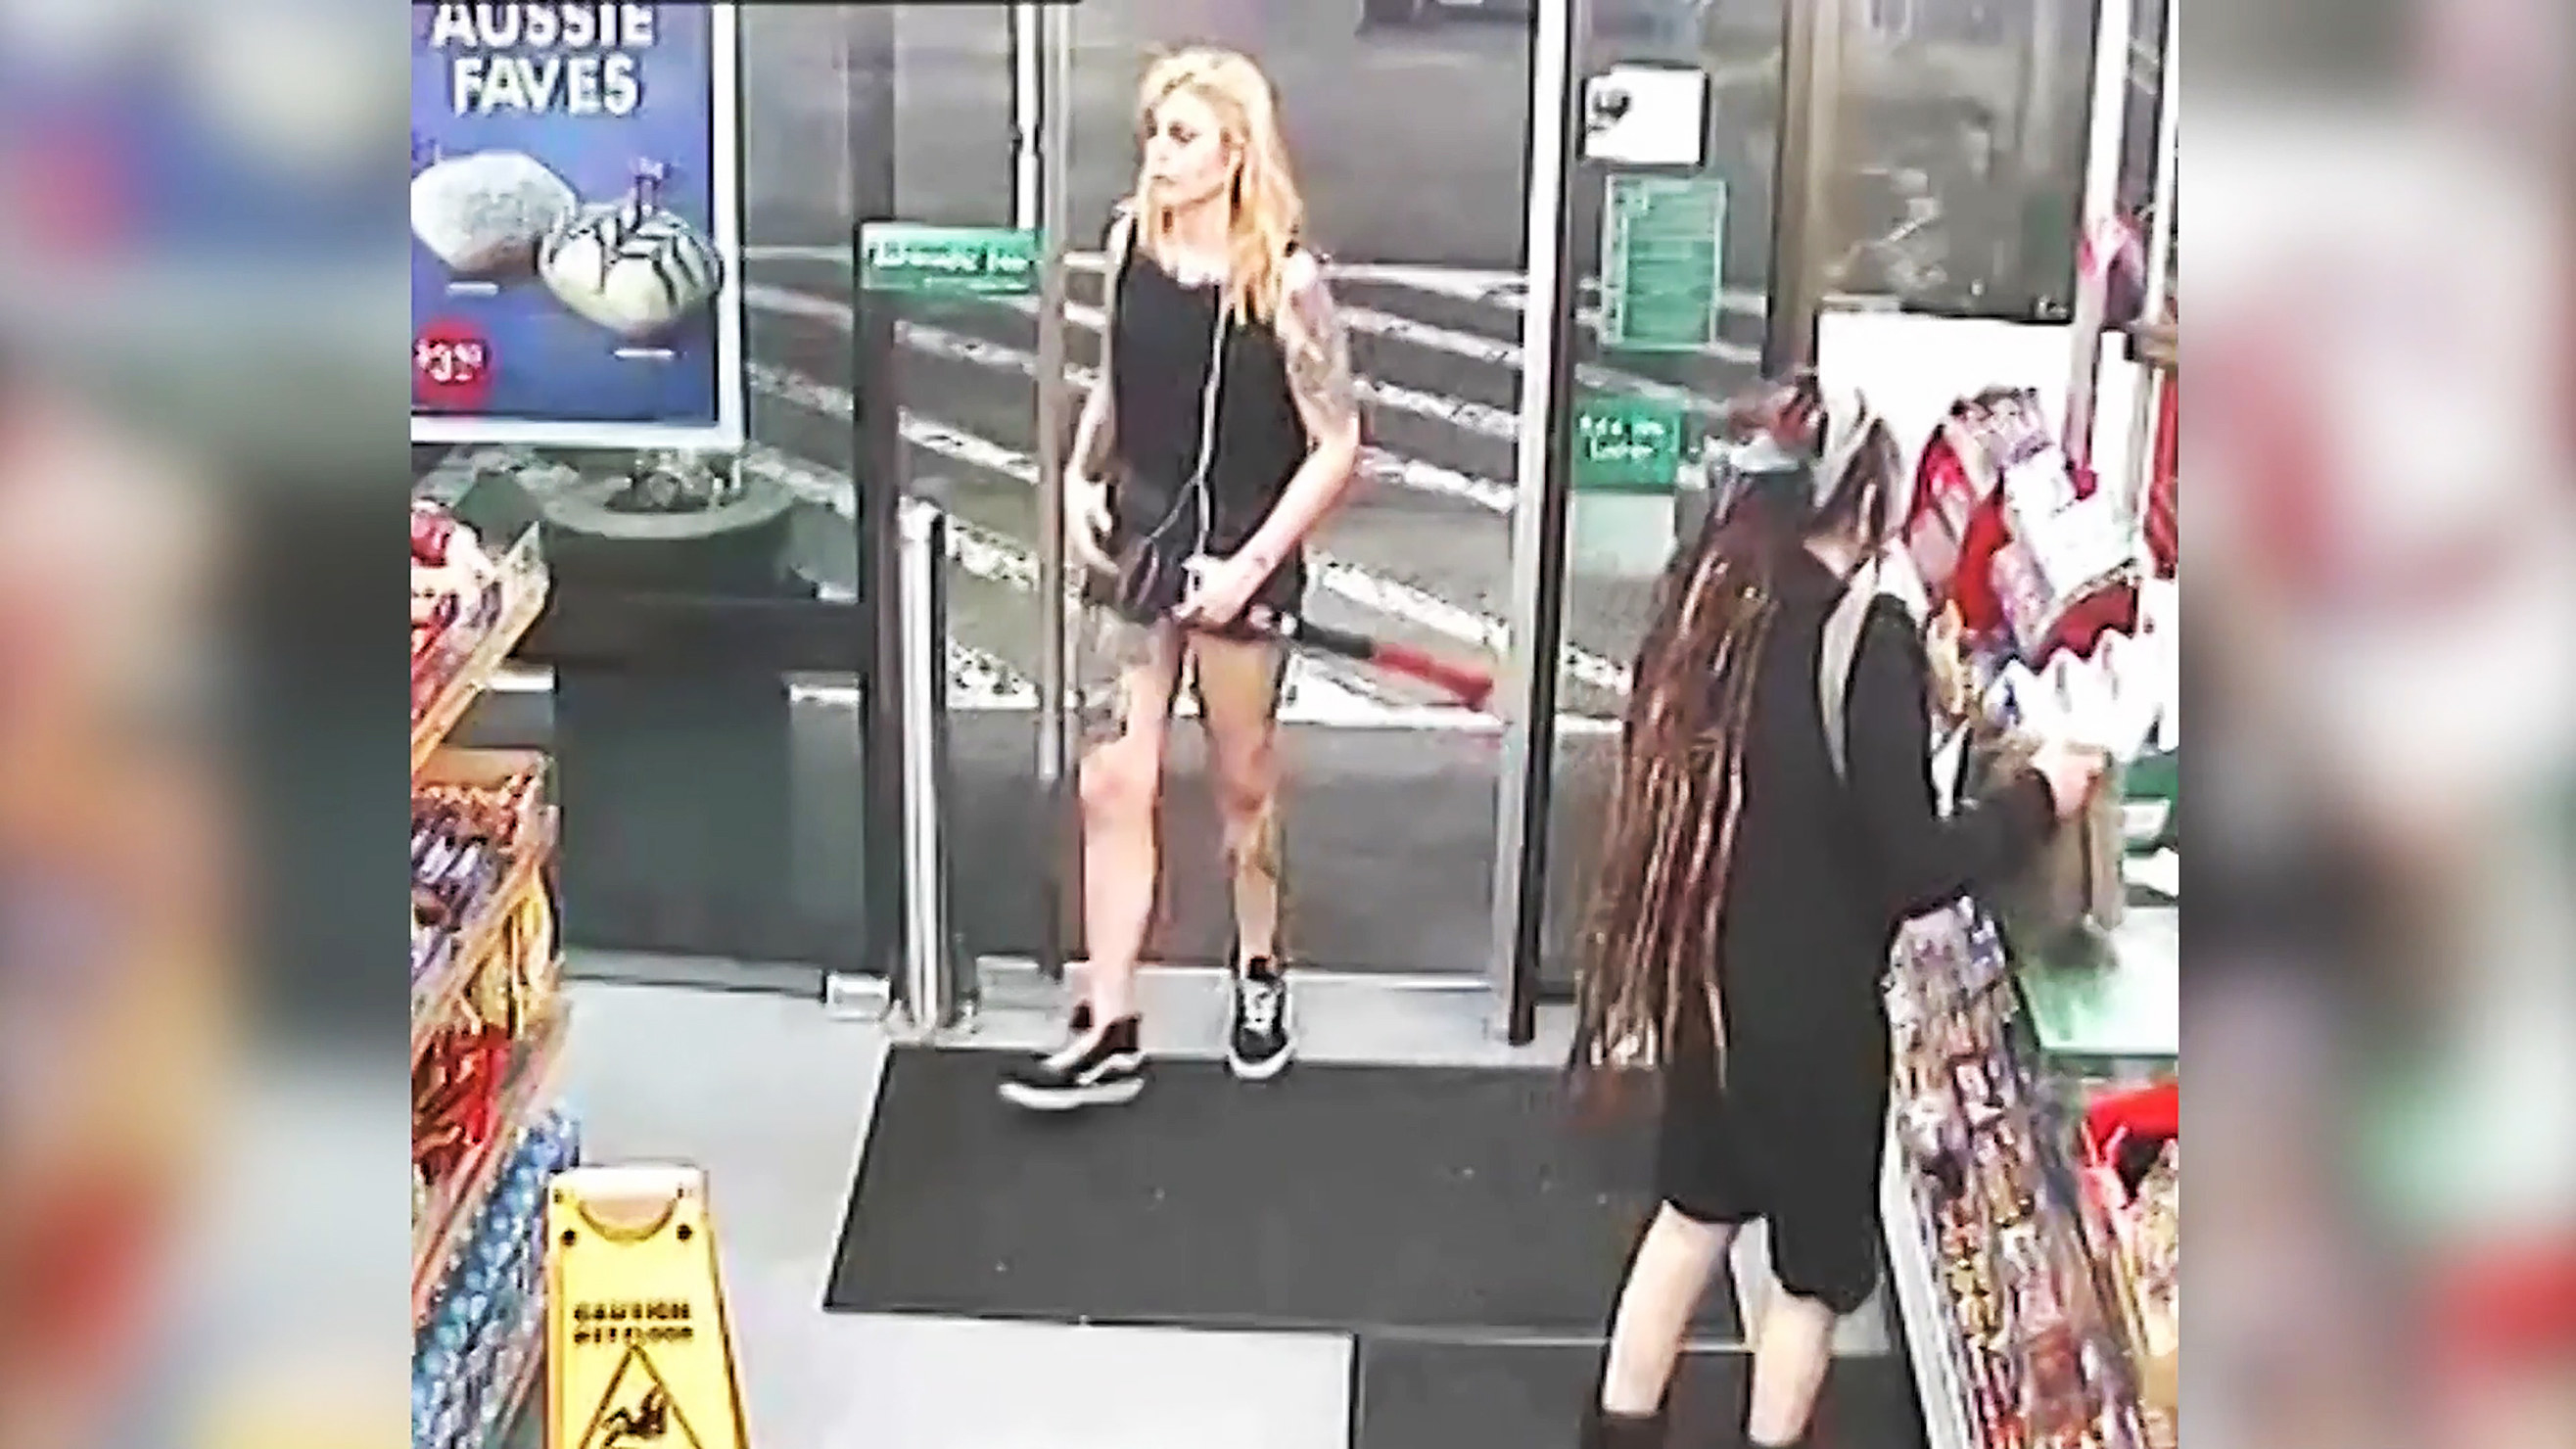 Woman Who Attacked Strangers With An Axe In 7-Eleven Has Jail Sentence Increased